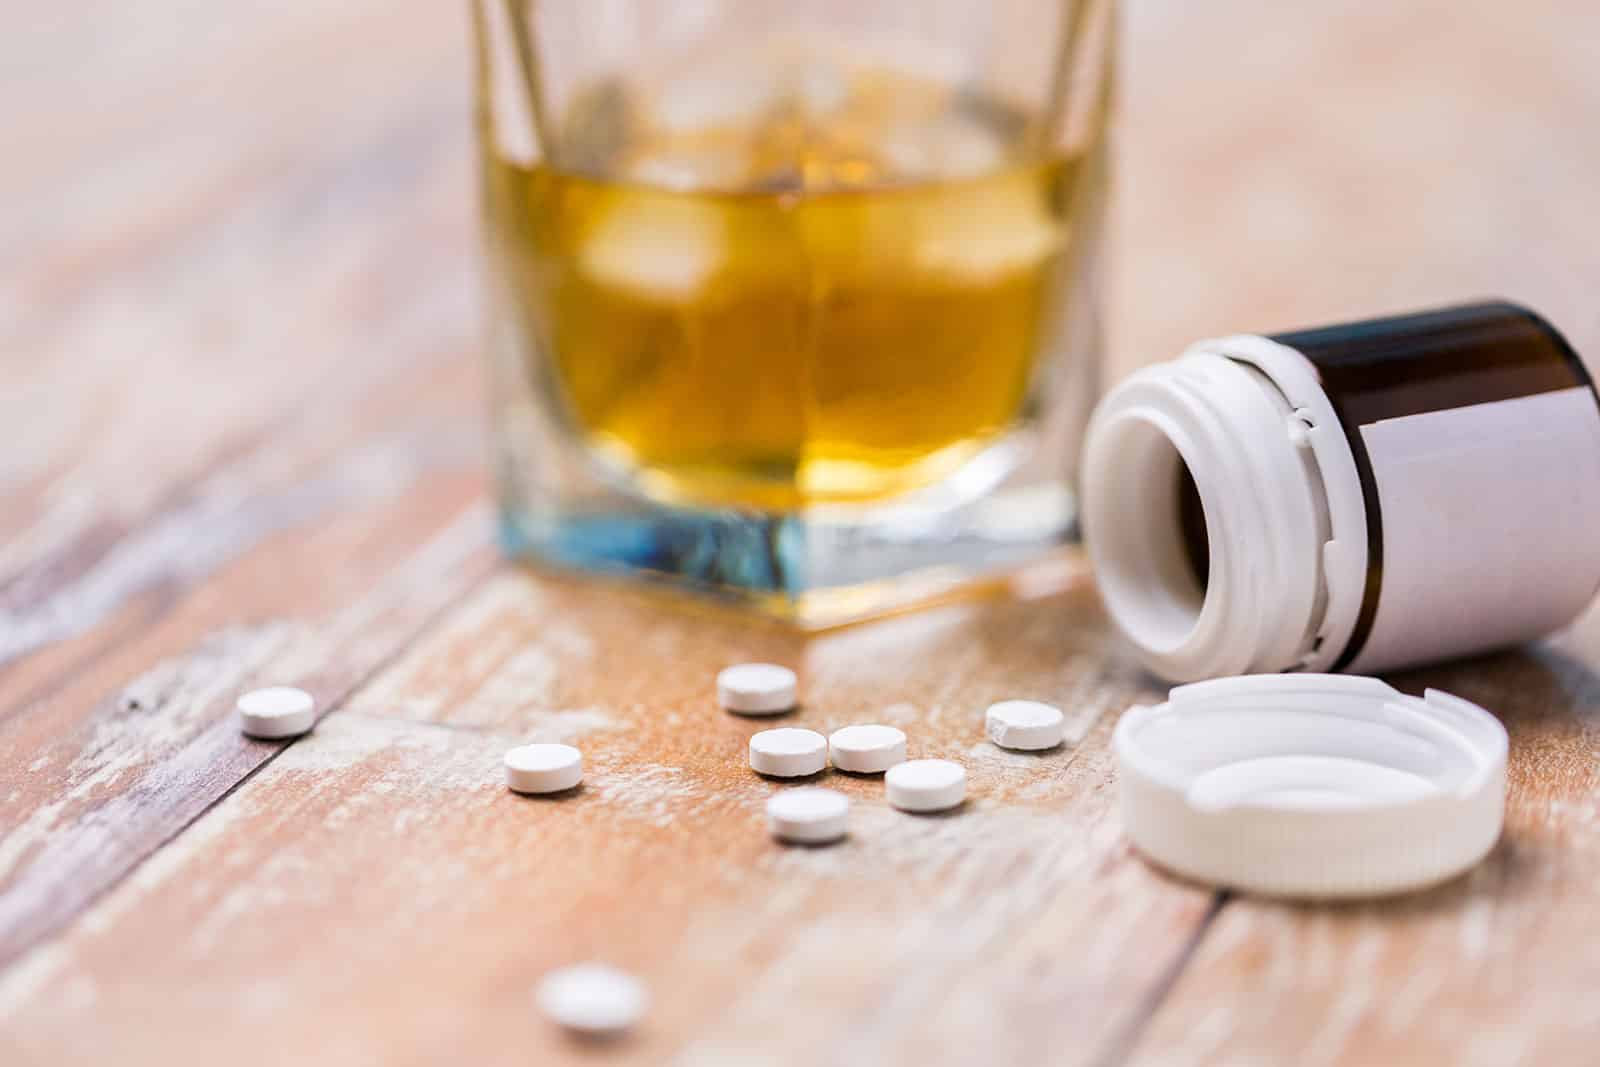 Trazodone and Alcohol: The Risks You Need to Know